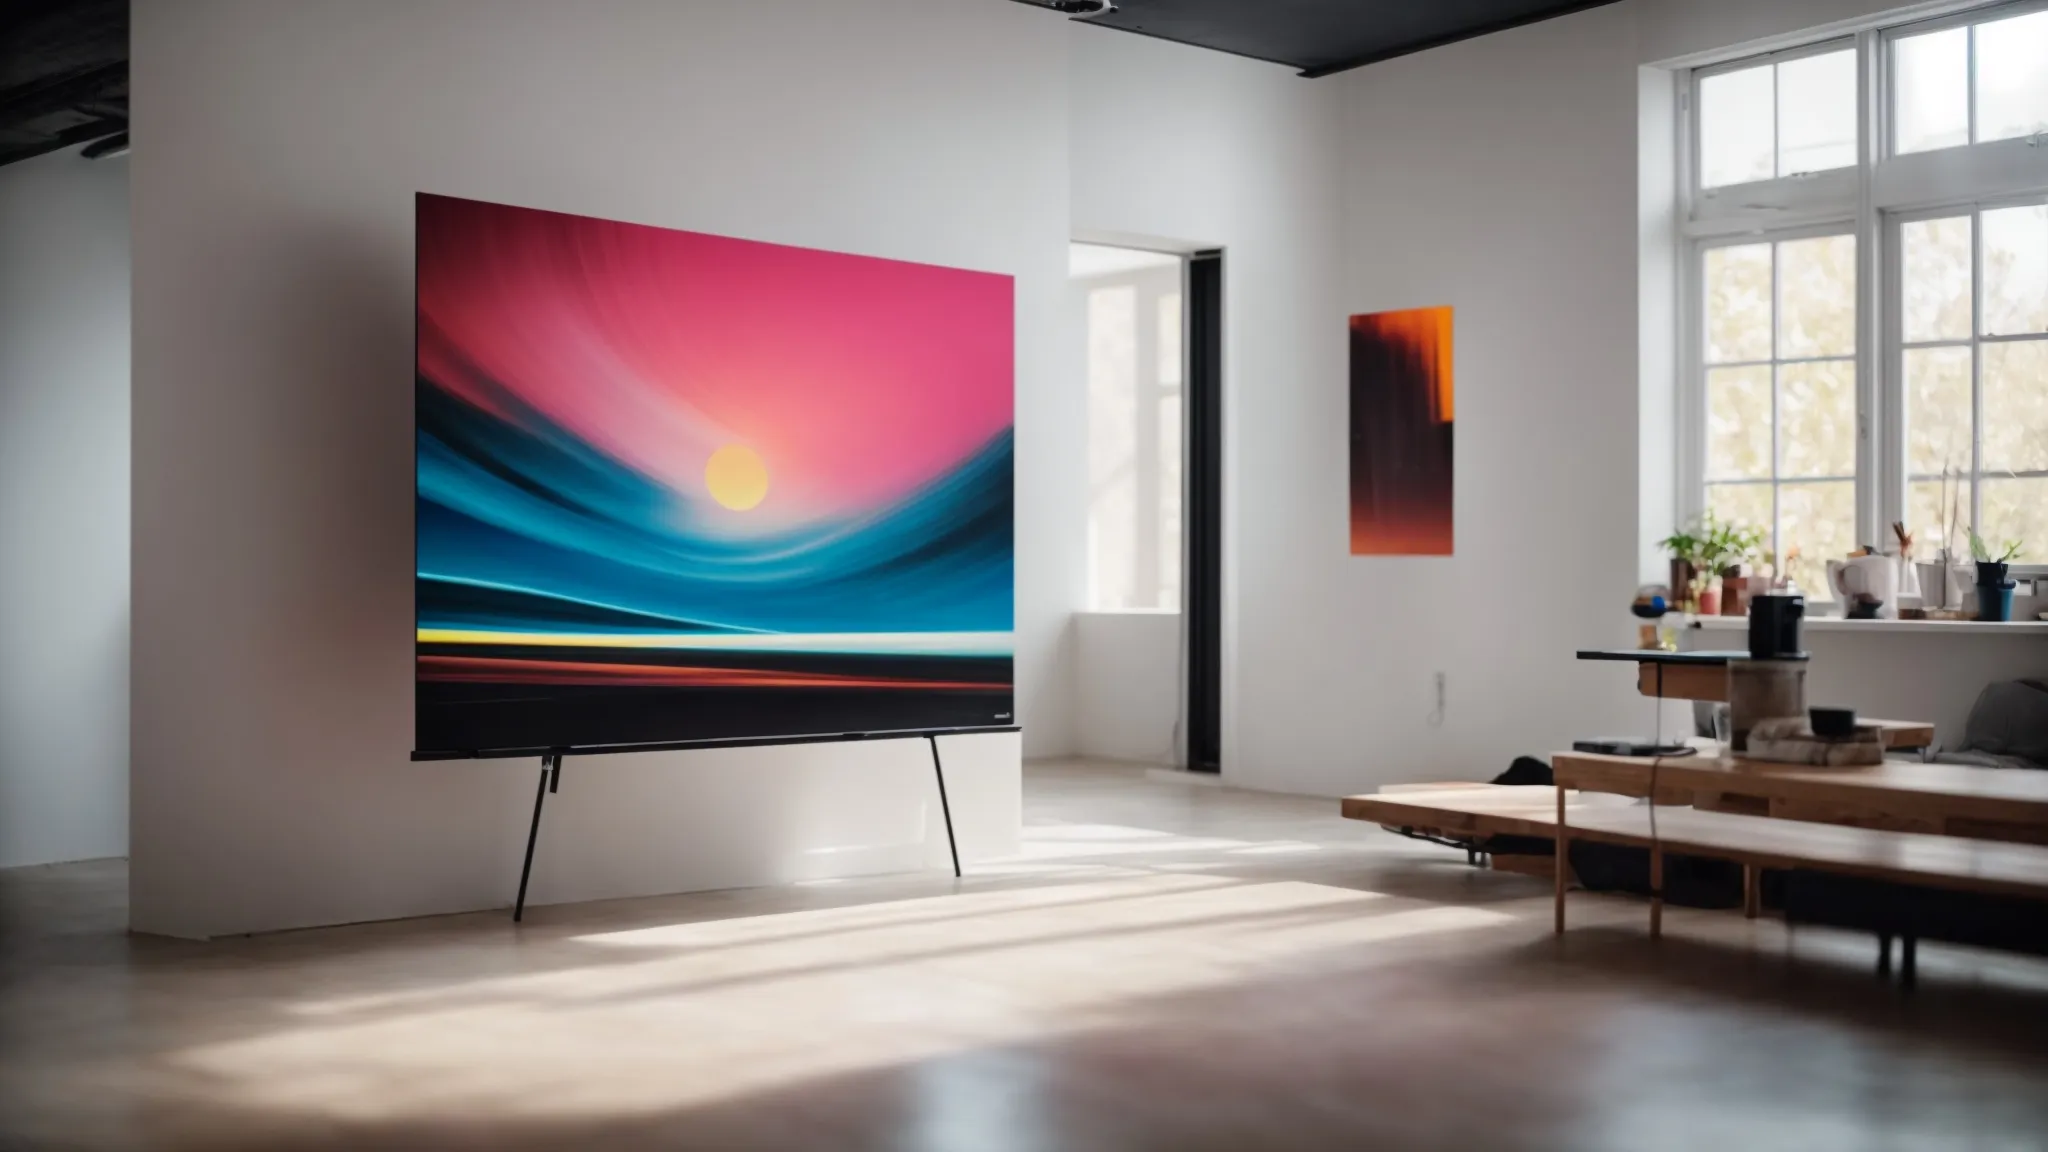 a sleek, minimalistic studio with a vibrant, modern painting on the wall, drawing the eye towards a strategically placed, glowing 